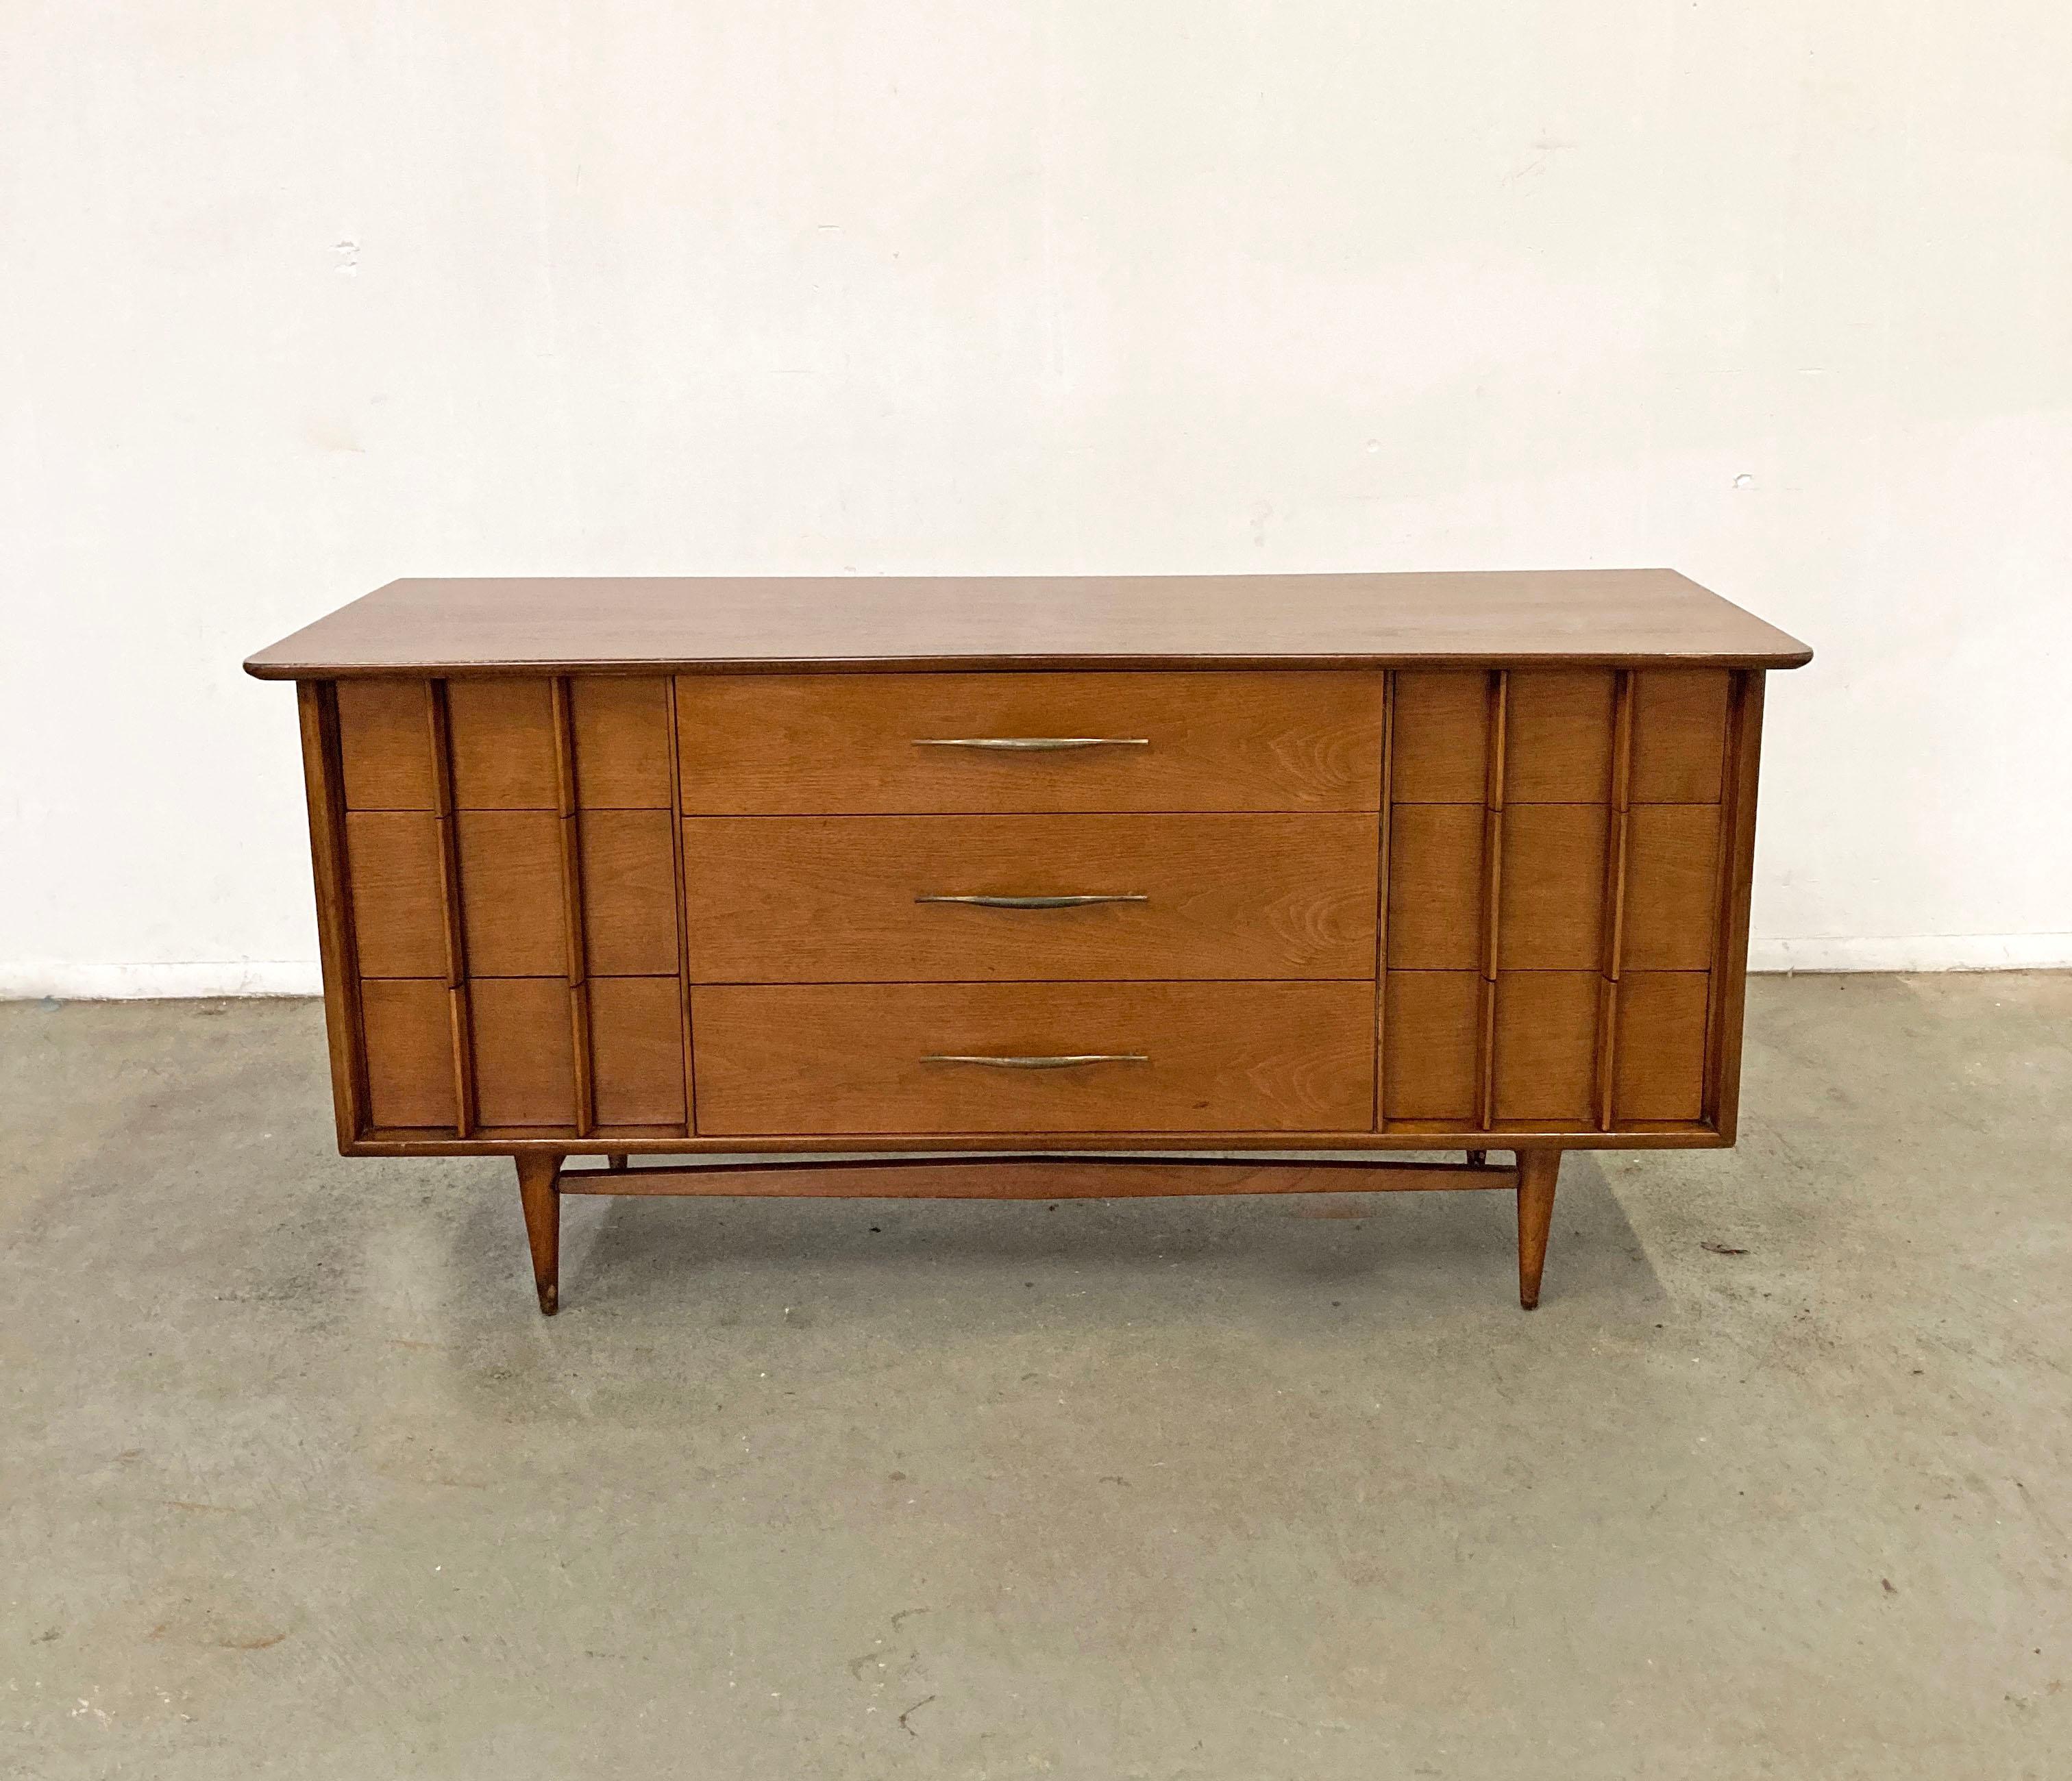 Offered is a vintage mid century modern credenza, made by Kent Coffey 